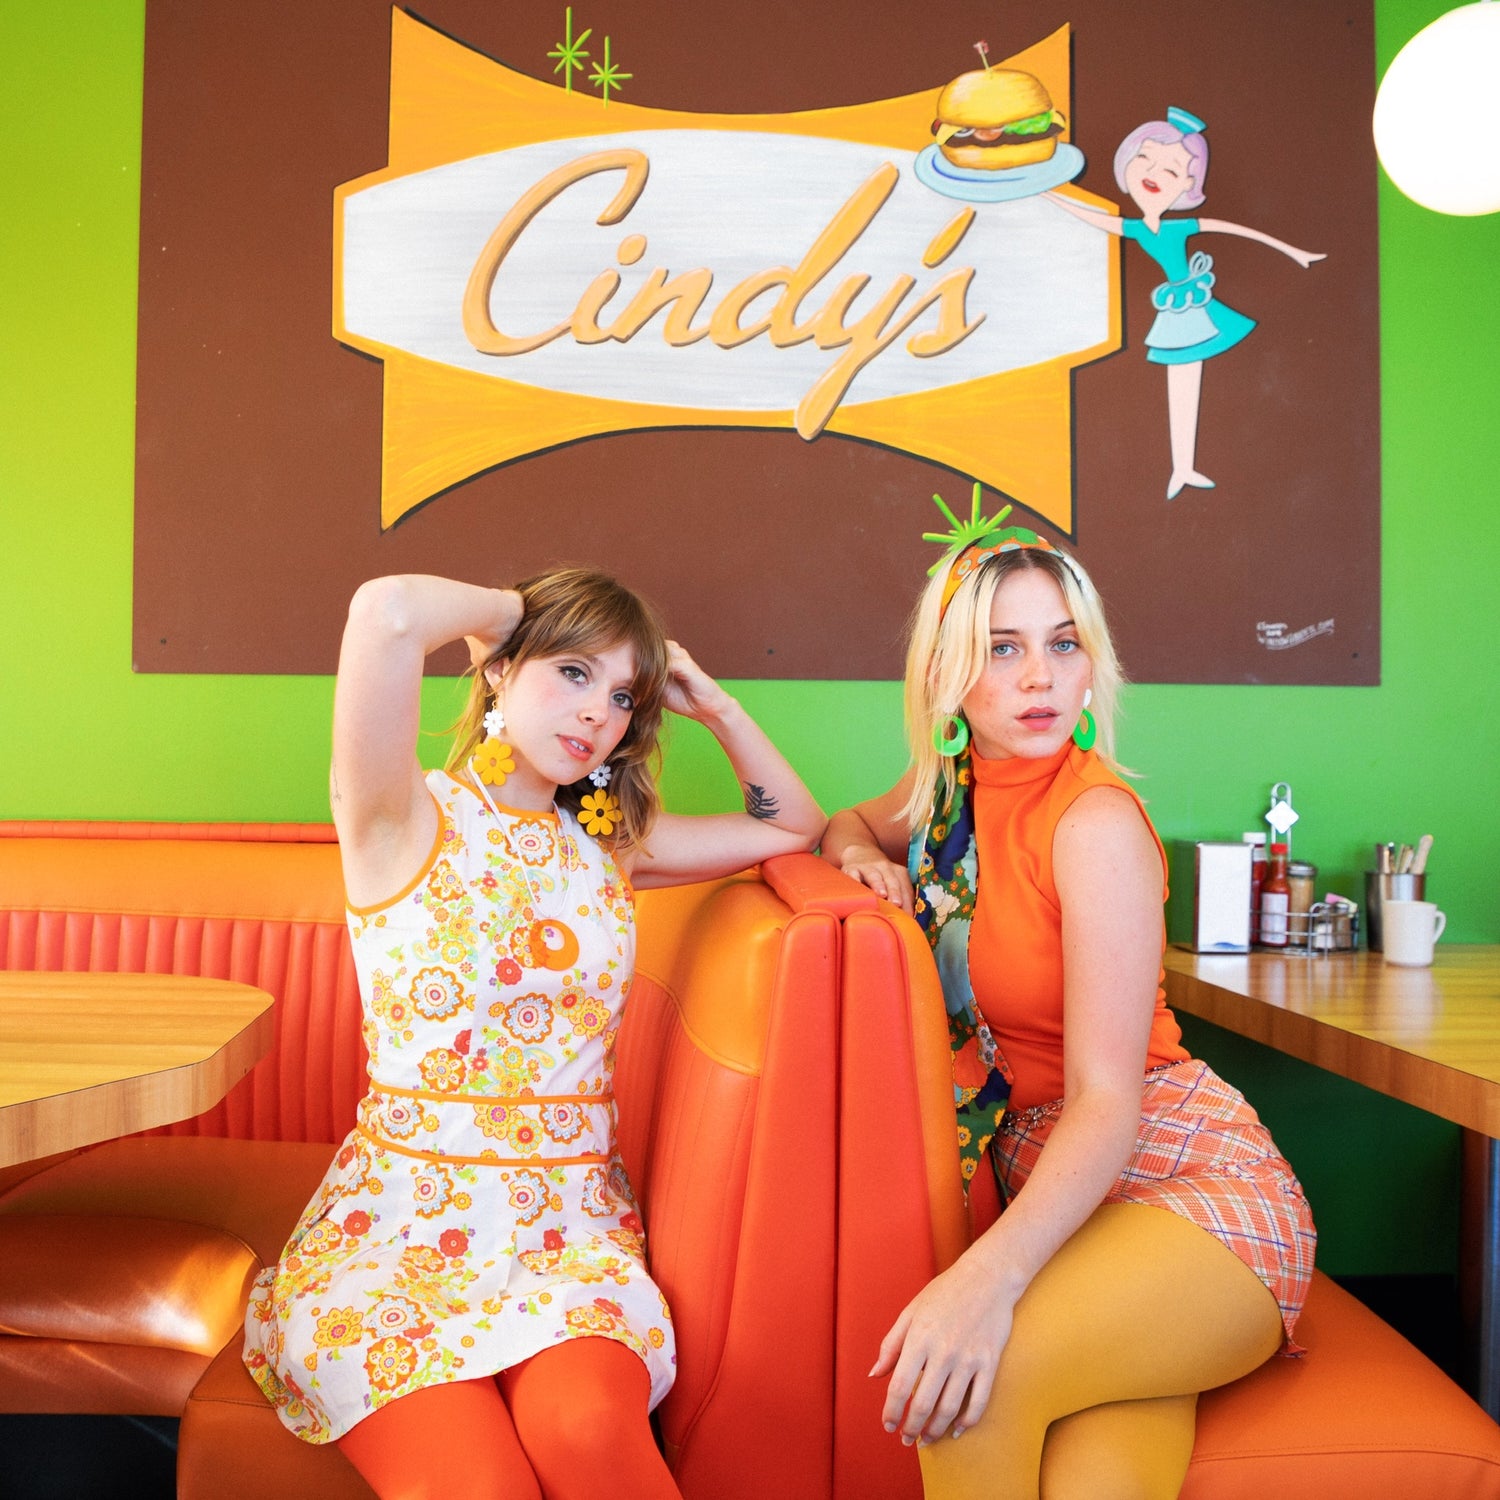 MindFlowers : A day at Cindy's Diner